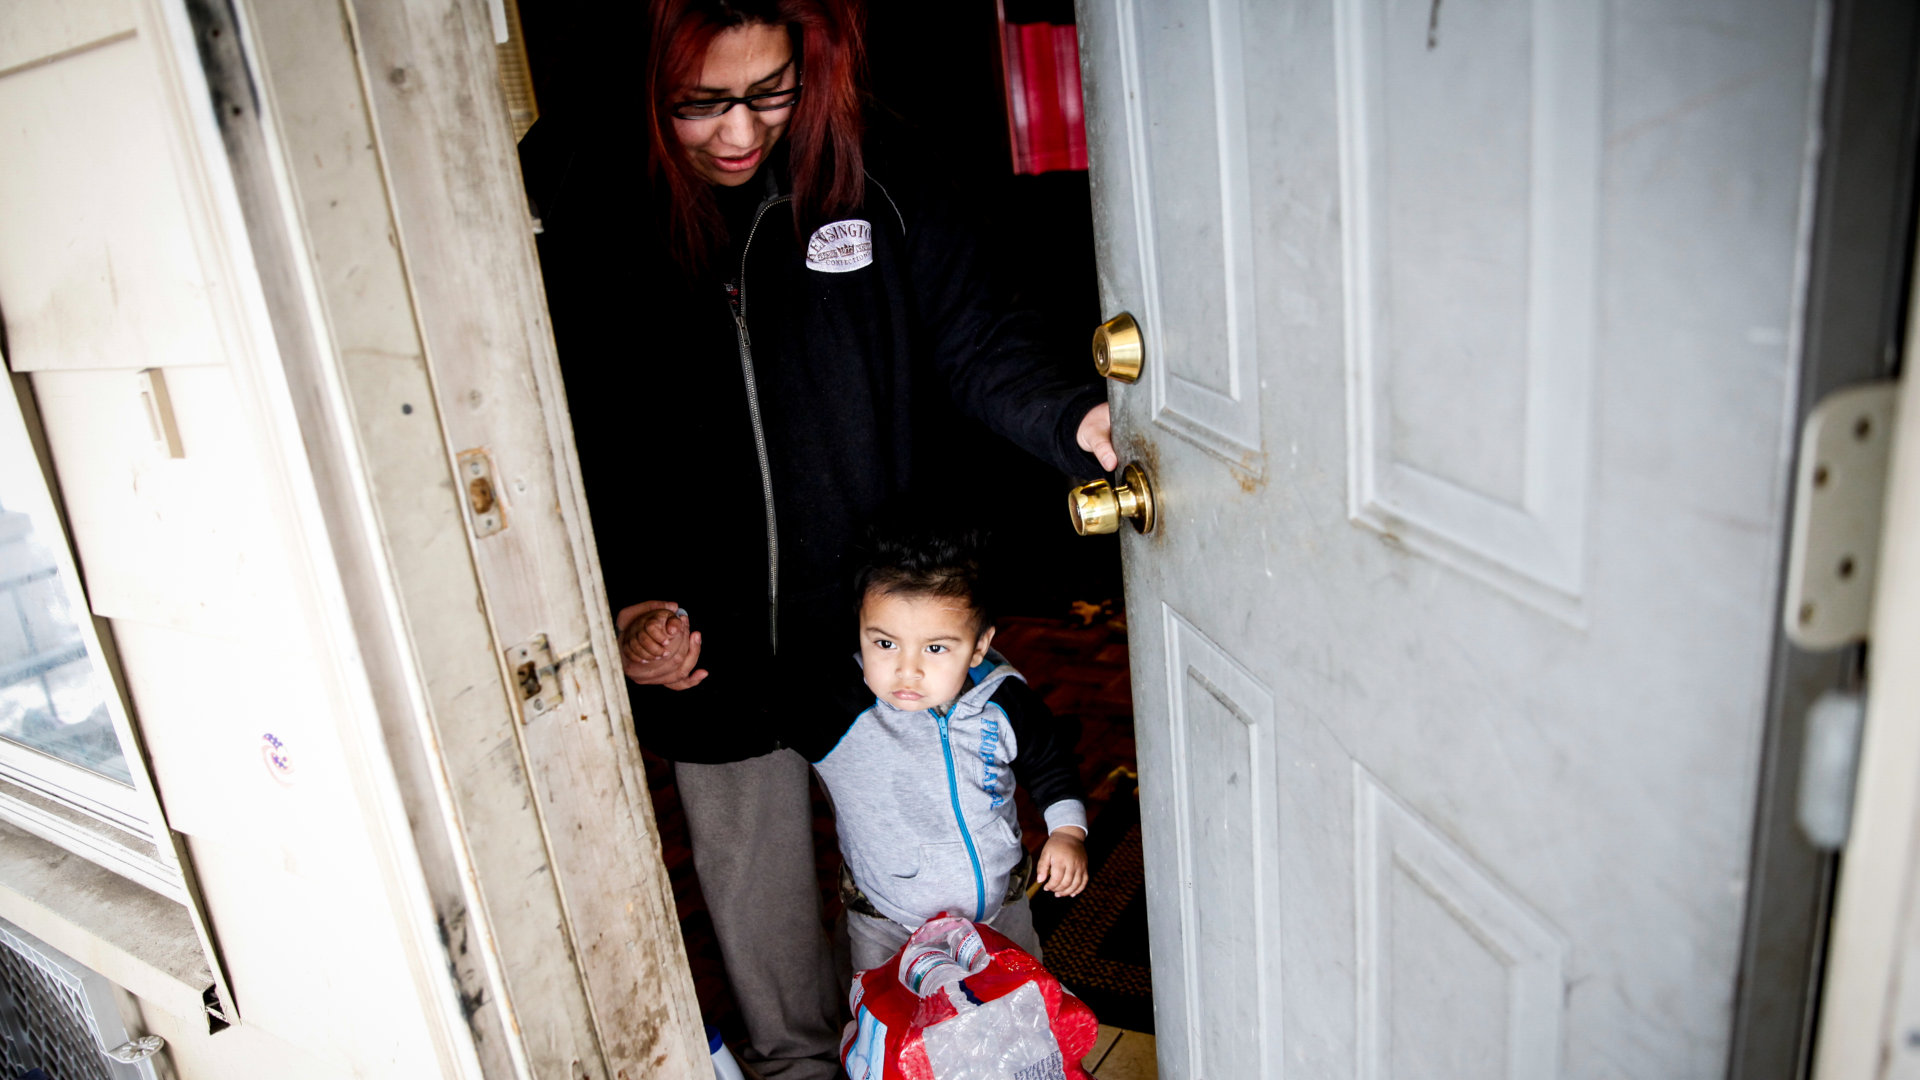 Sandra Mendez and her 1-year-old son receive water from Red Cross volunteers at their home January 21, 2016 in Flint, Michigan.